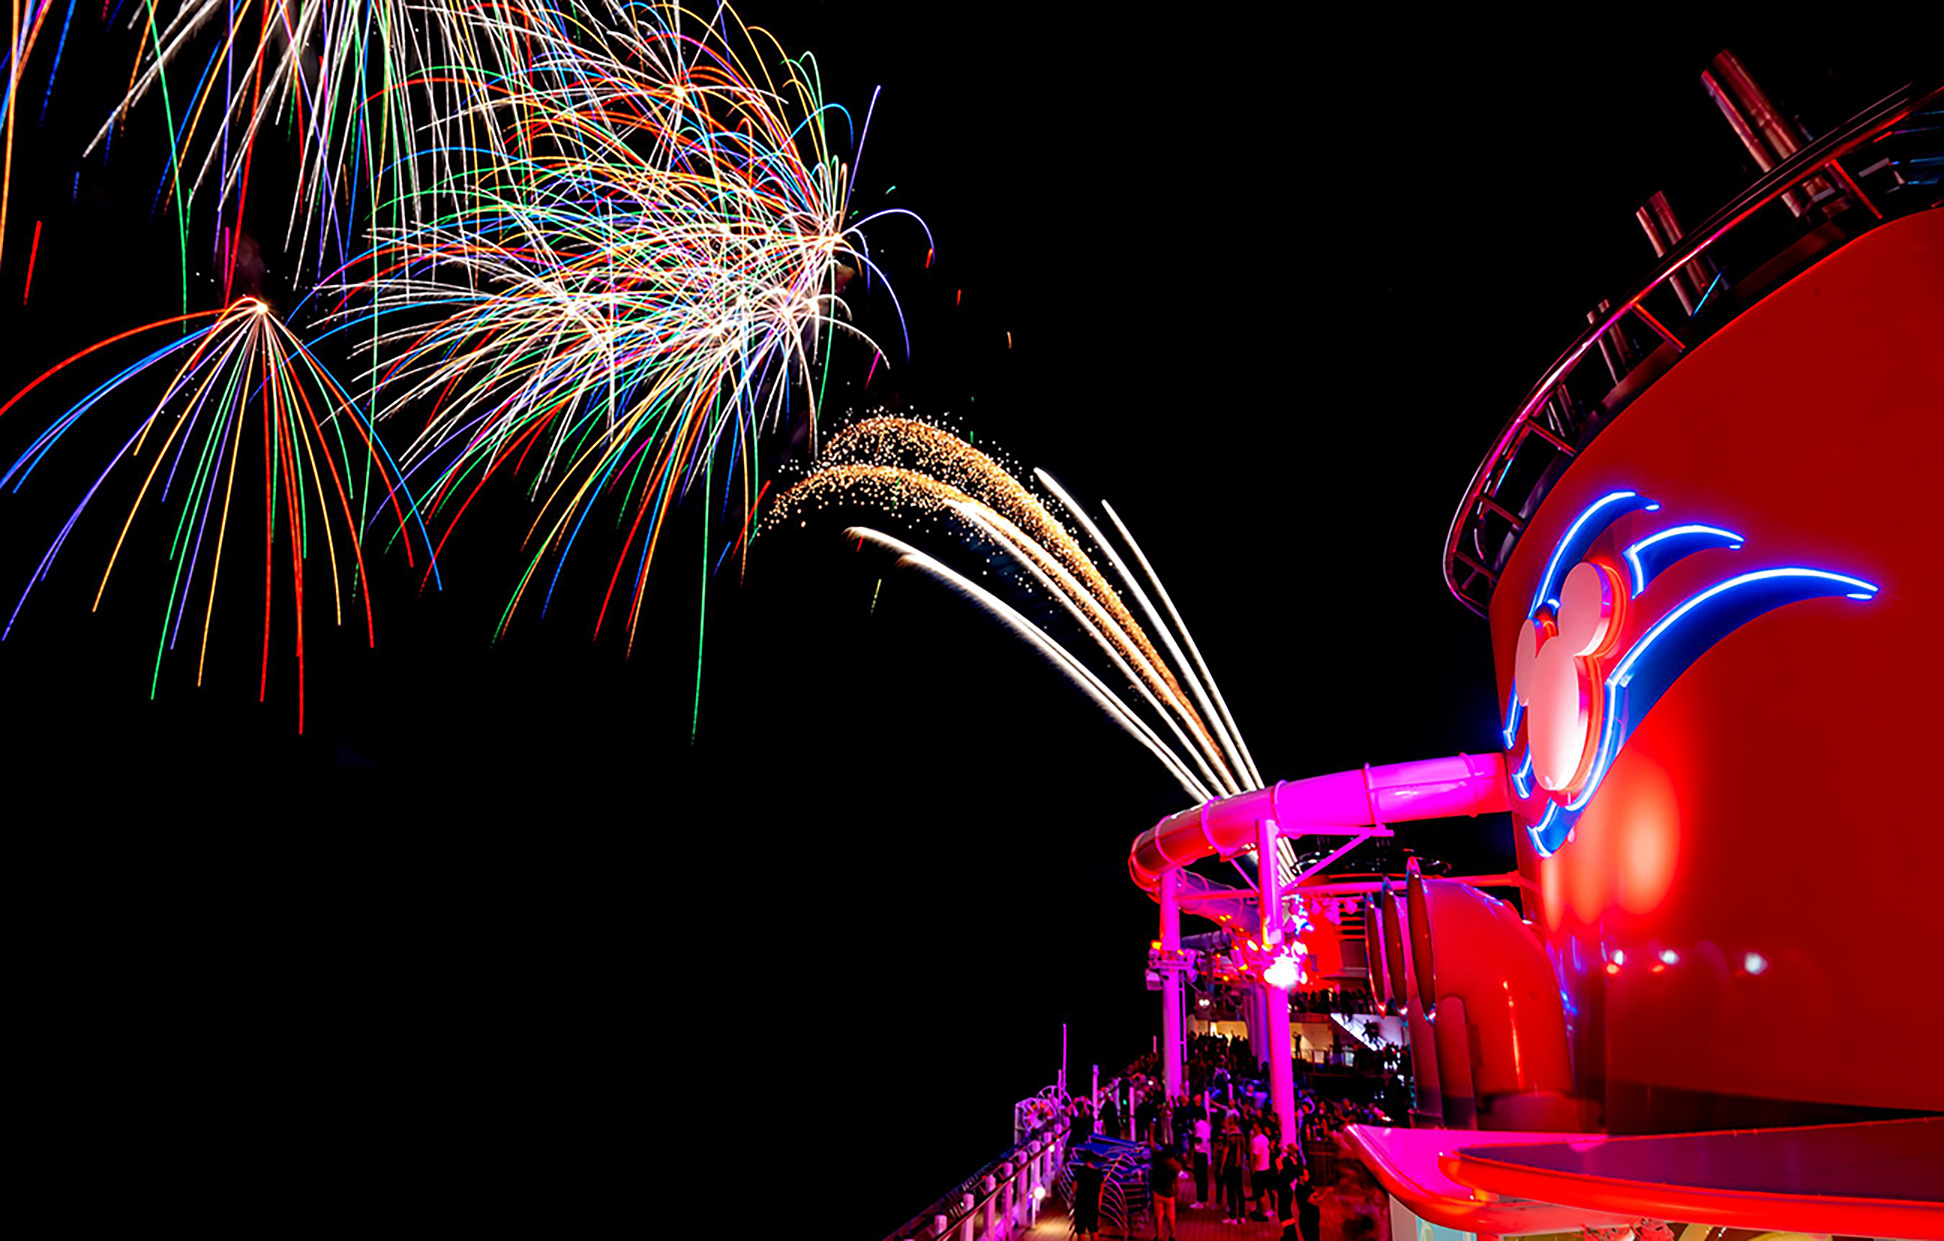 Another signature Disney Cruise Line nighttime deck celebration, Pirate’s Rockin’ Parlay Party, returns aboard the Disney Treasure. On one special night of every voyage, guests of all ages can don their most swashbuckling pirate garb and head to the upper decks for a rollicking rock-and-roll extravaganza, complete with fireworks at sea like only Disney can do. (Amy Smith, photographer)